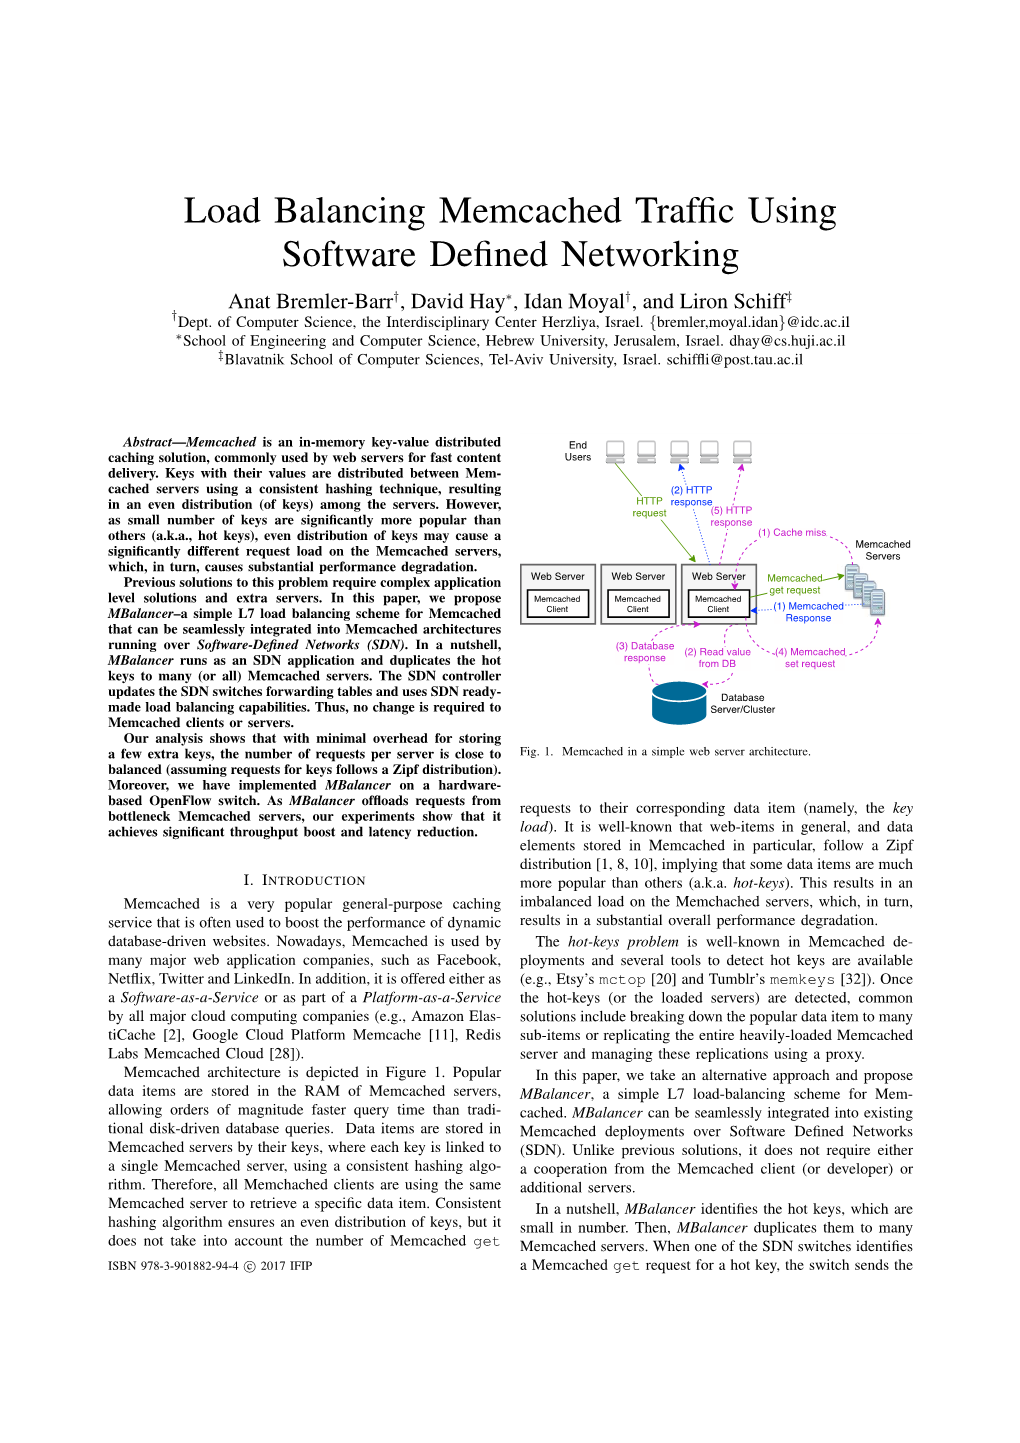 Load Balancing Memcached Traffic Using Software Defined Networking